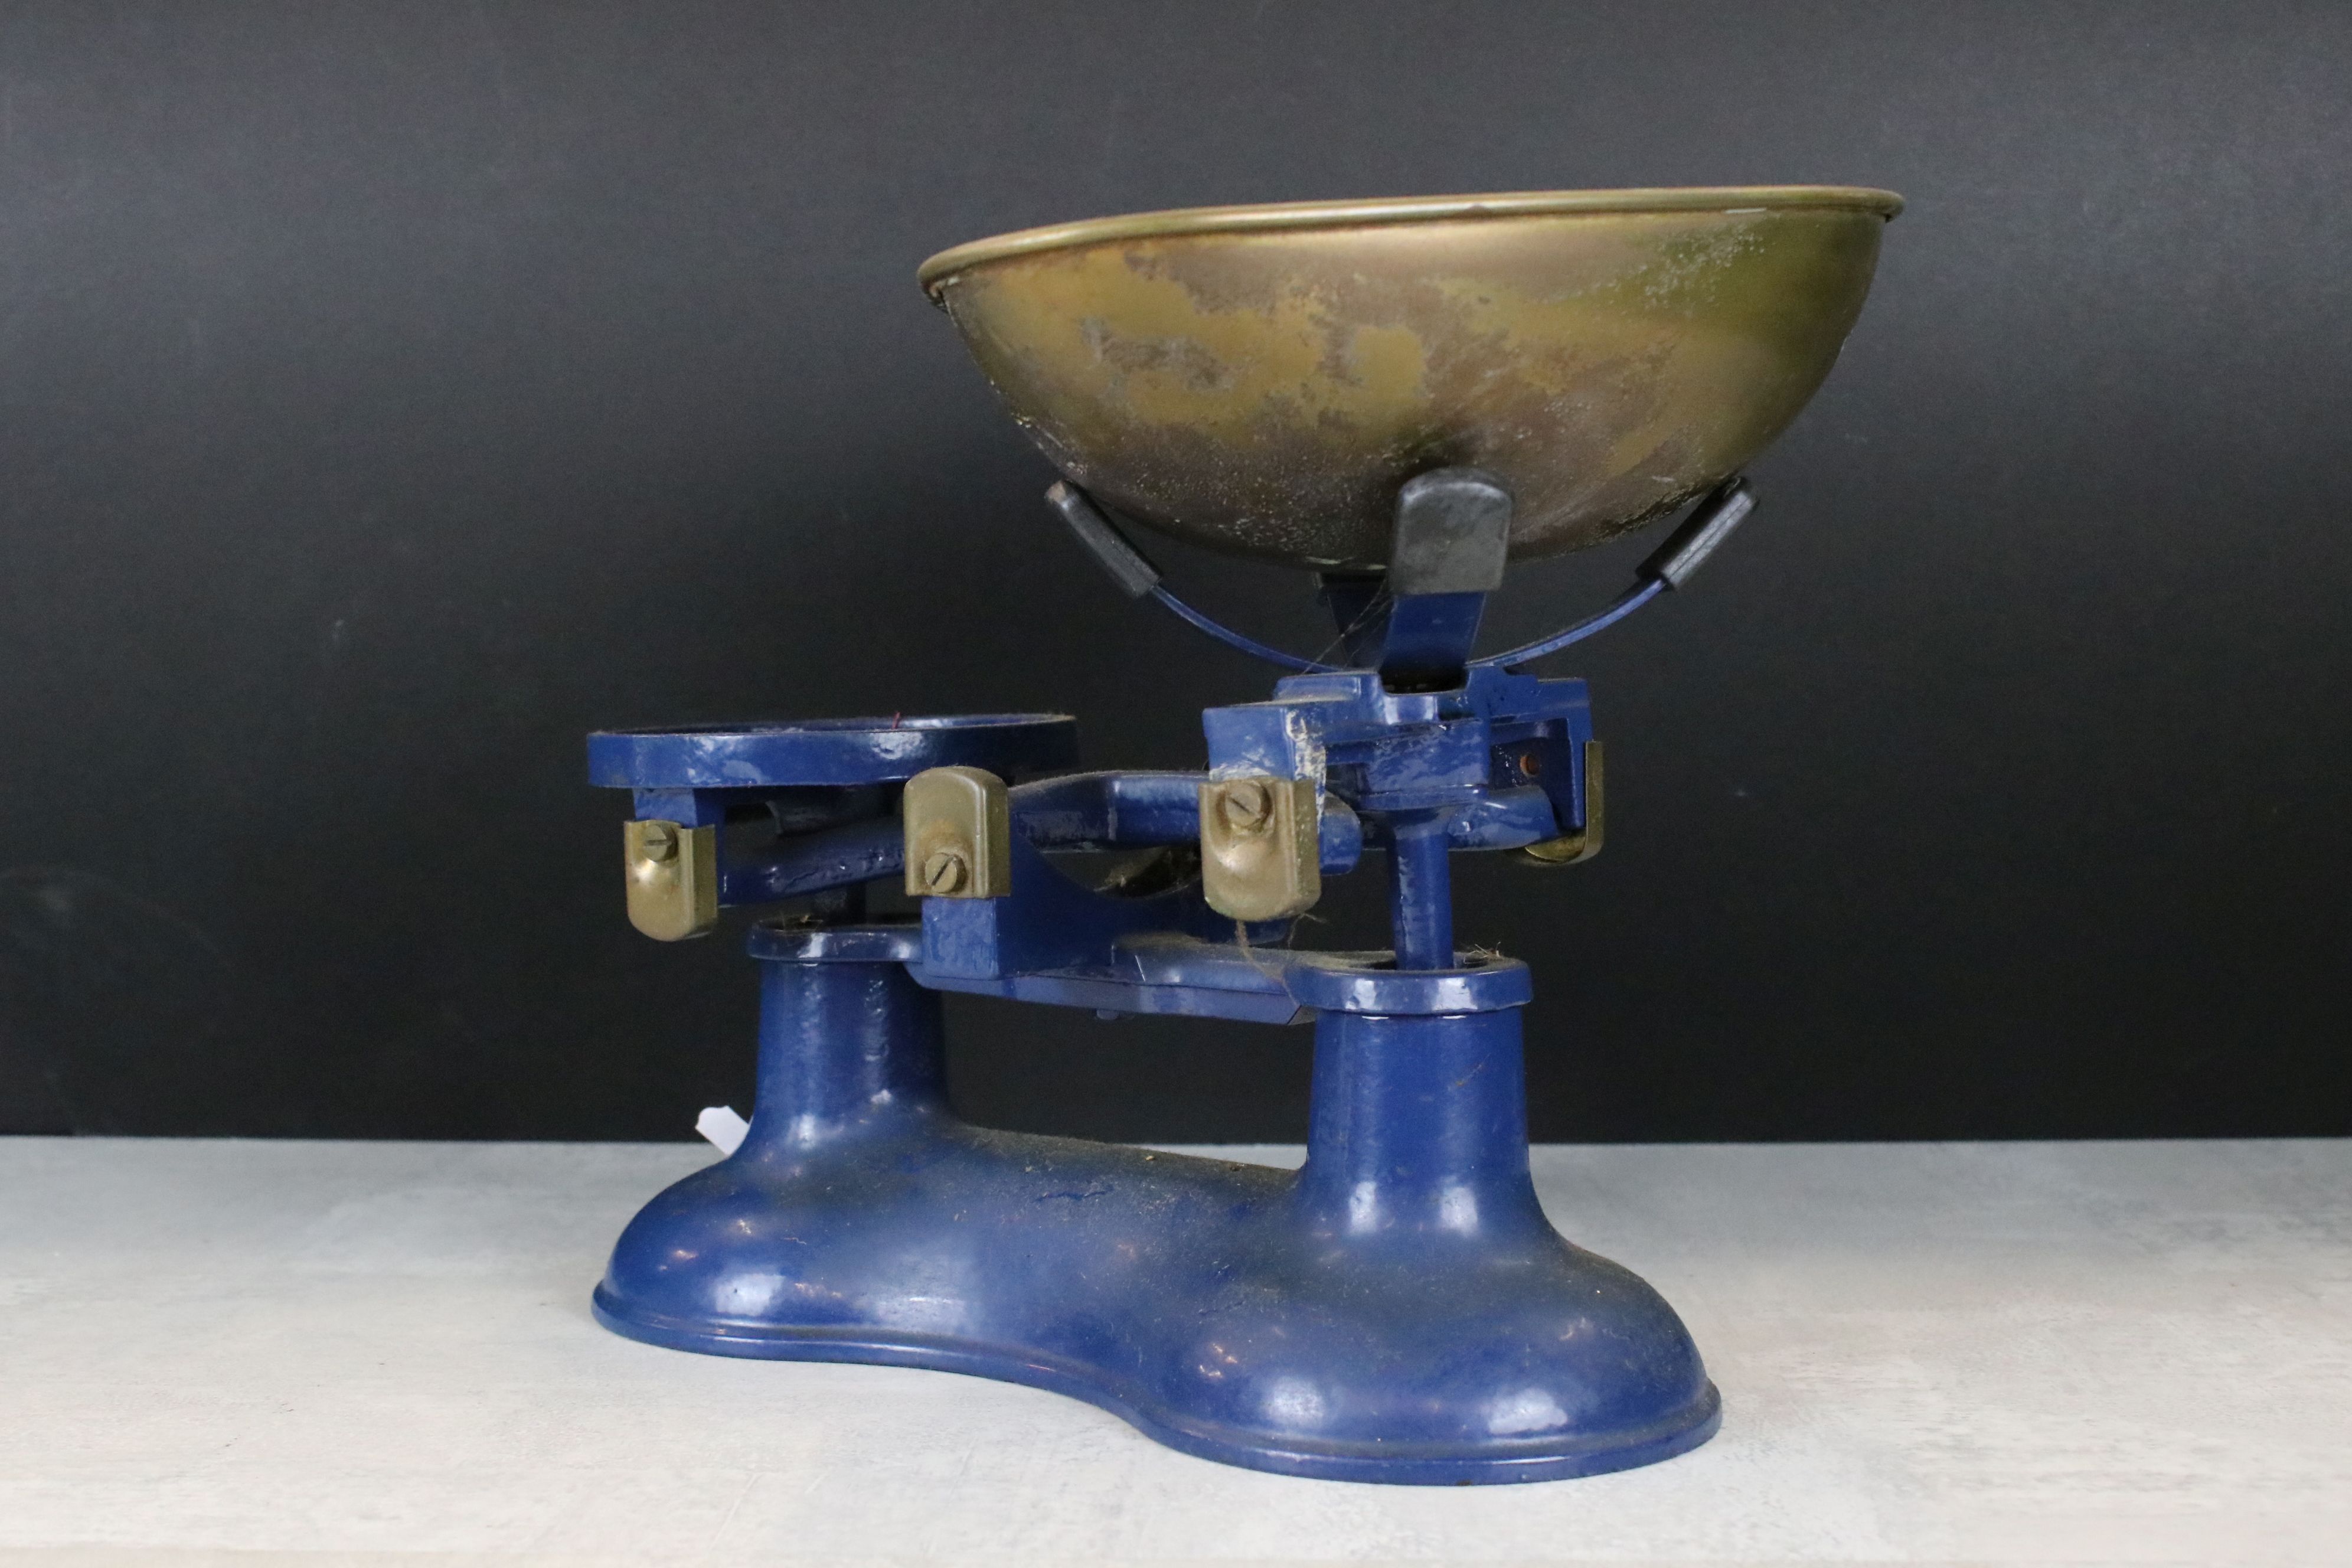 A set of blue Victor kitchen scales complete with weights. - Image 4 of 7